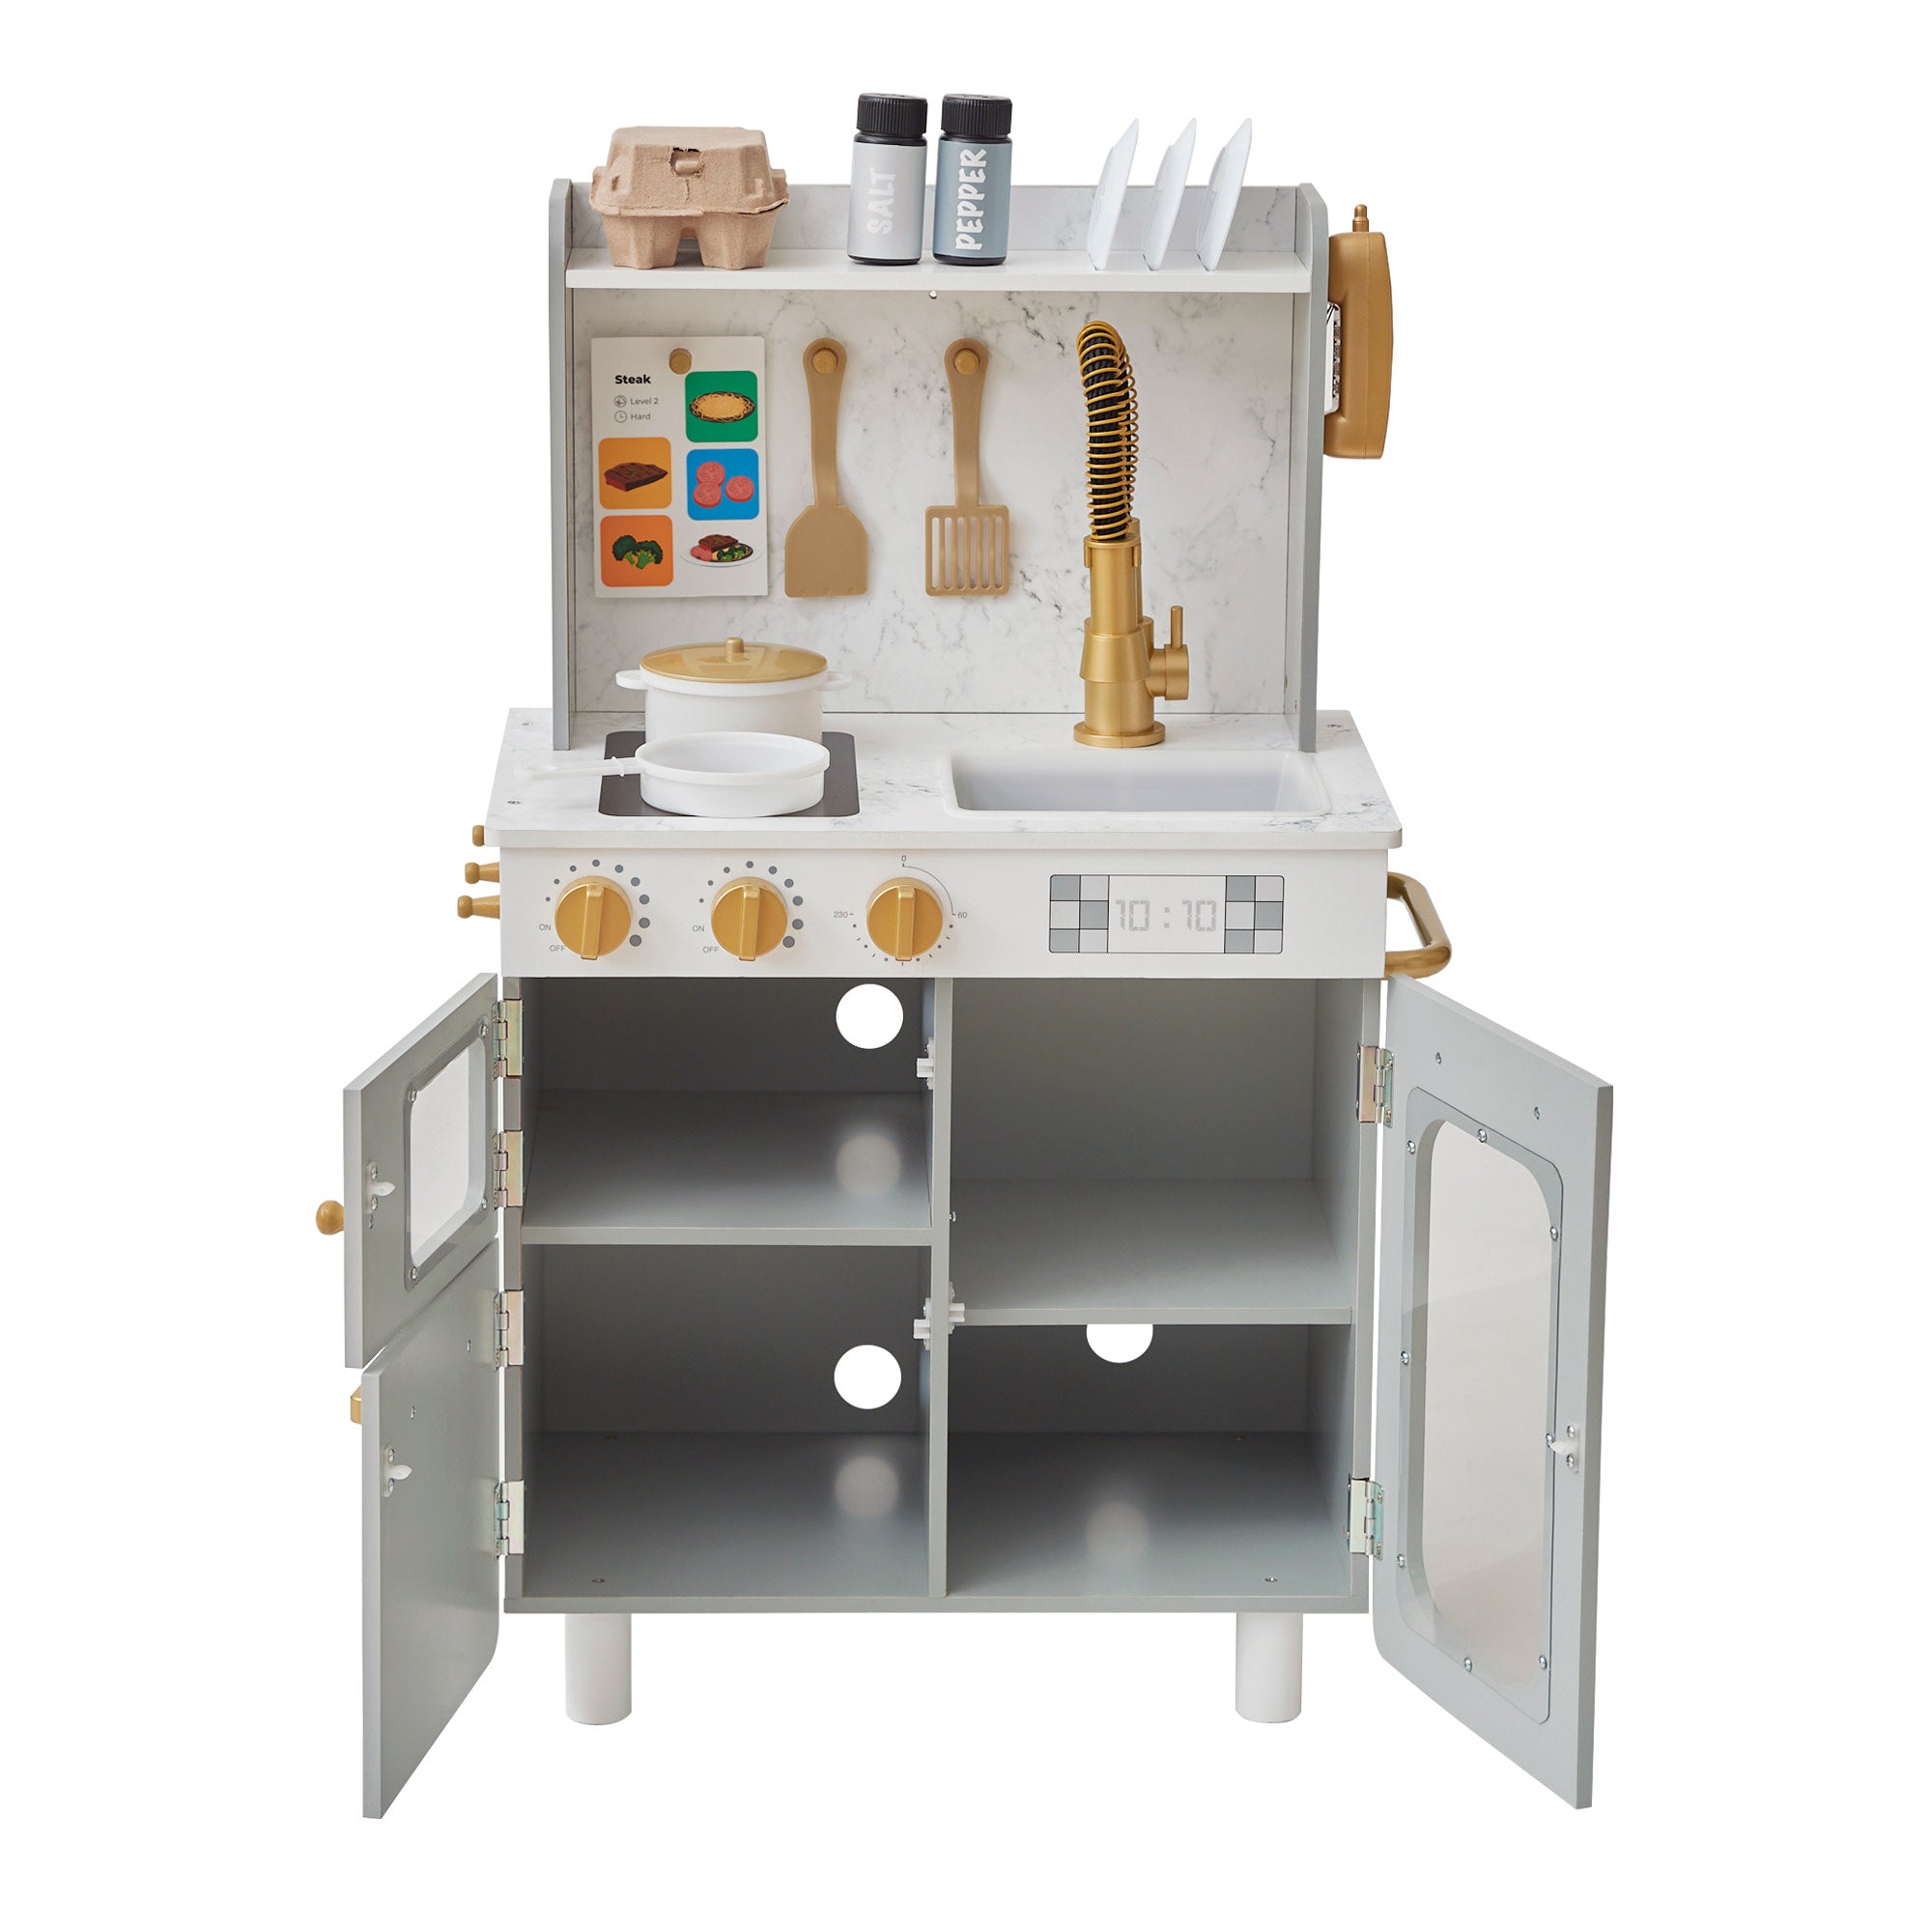 TEAMSON KIDS - LITTLE CHEF MEMPHIS SMALL PLAY KITCHEN, GRAY/GOLD